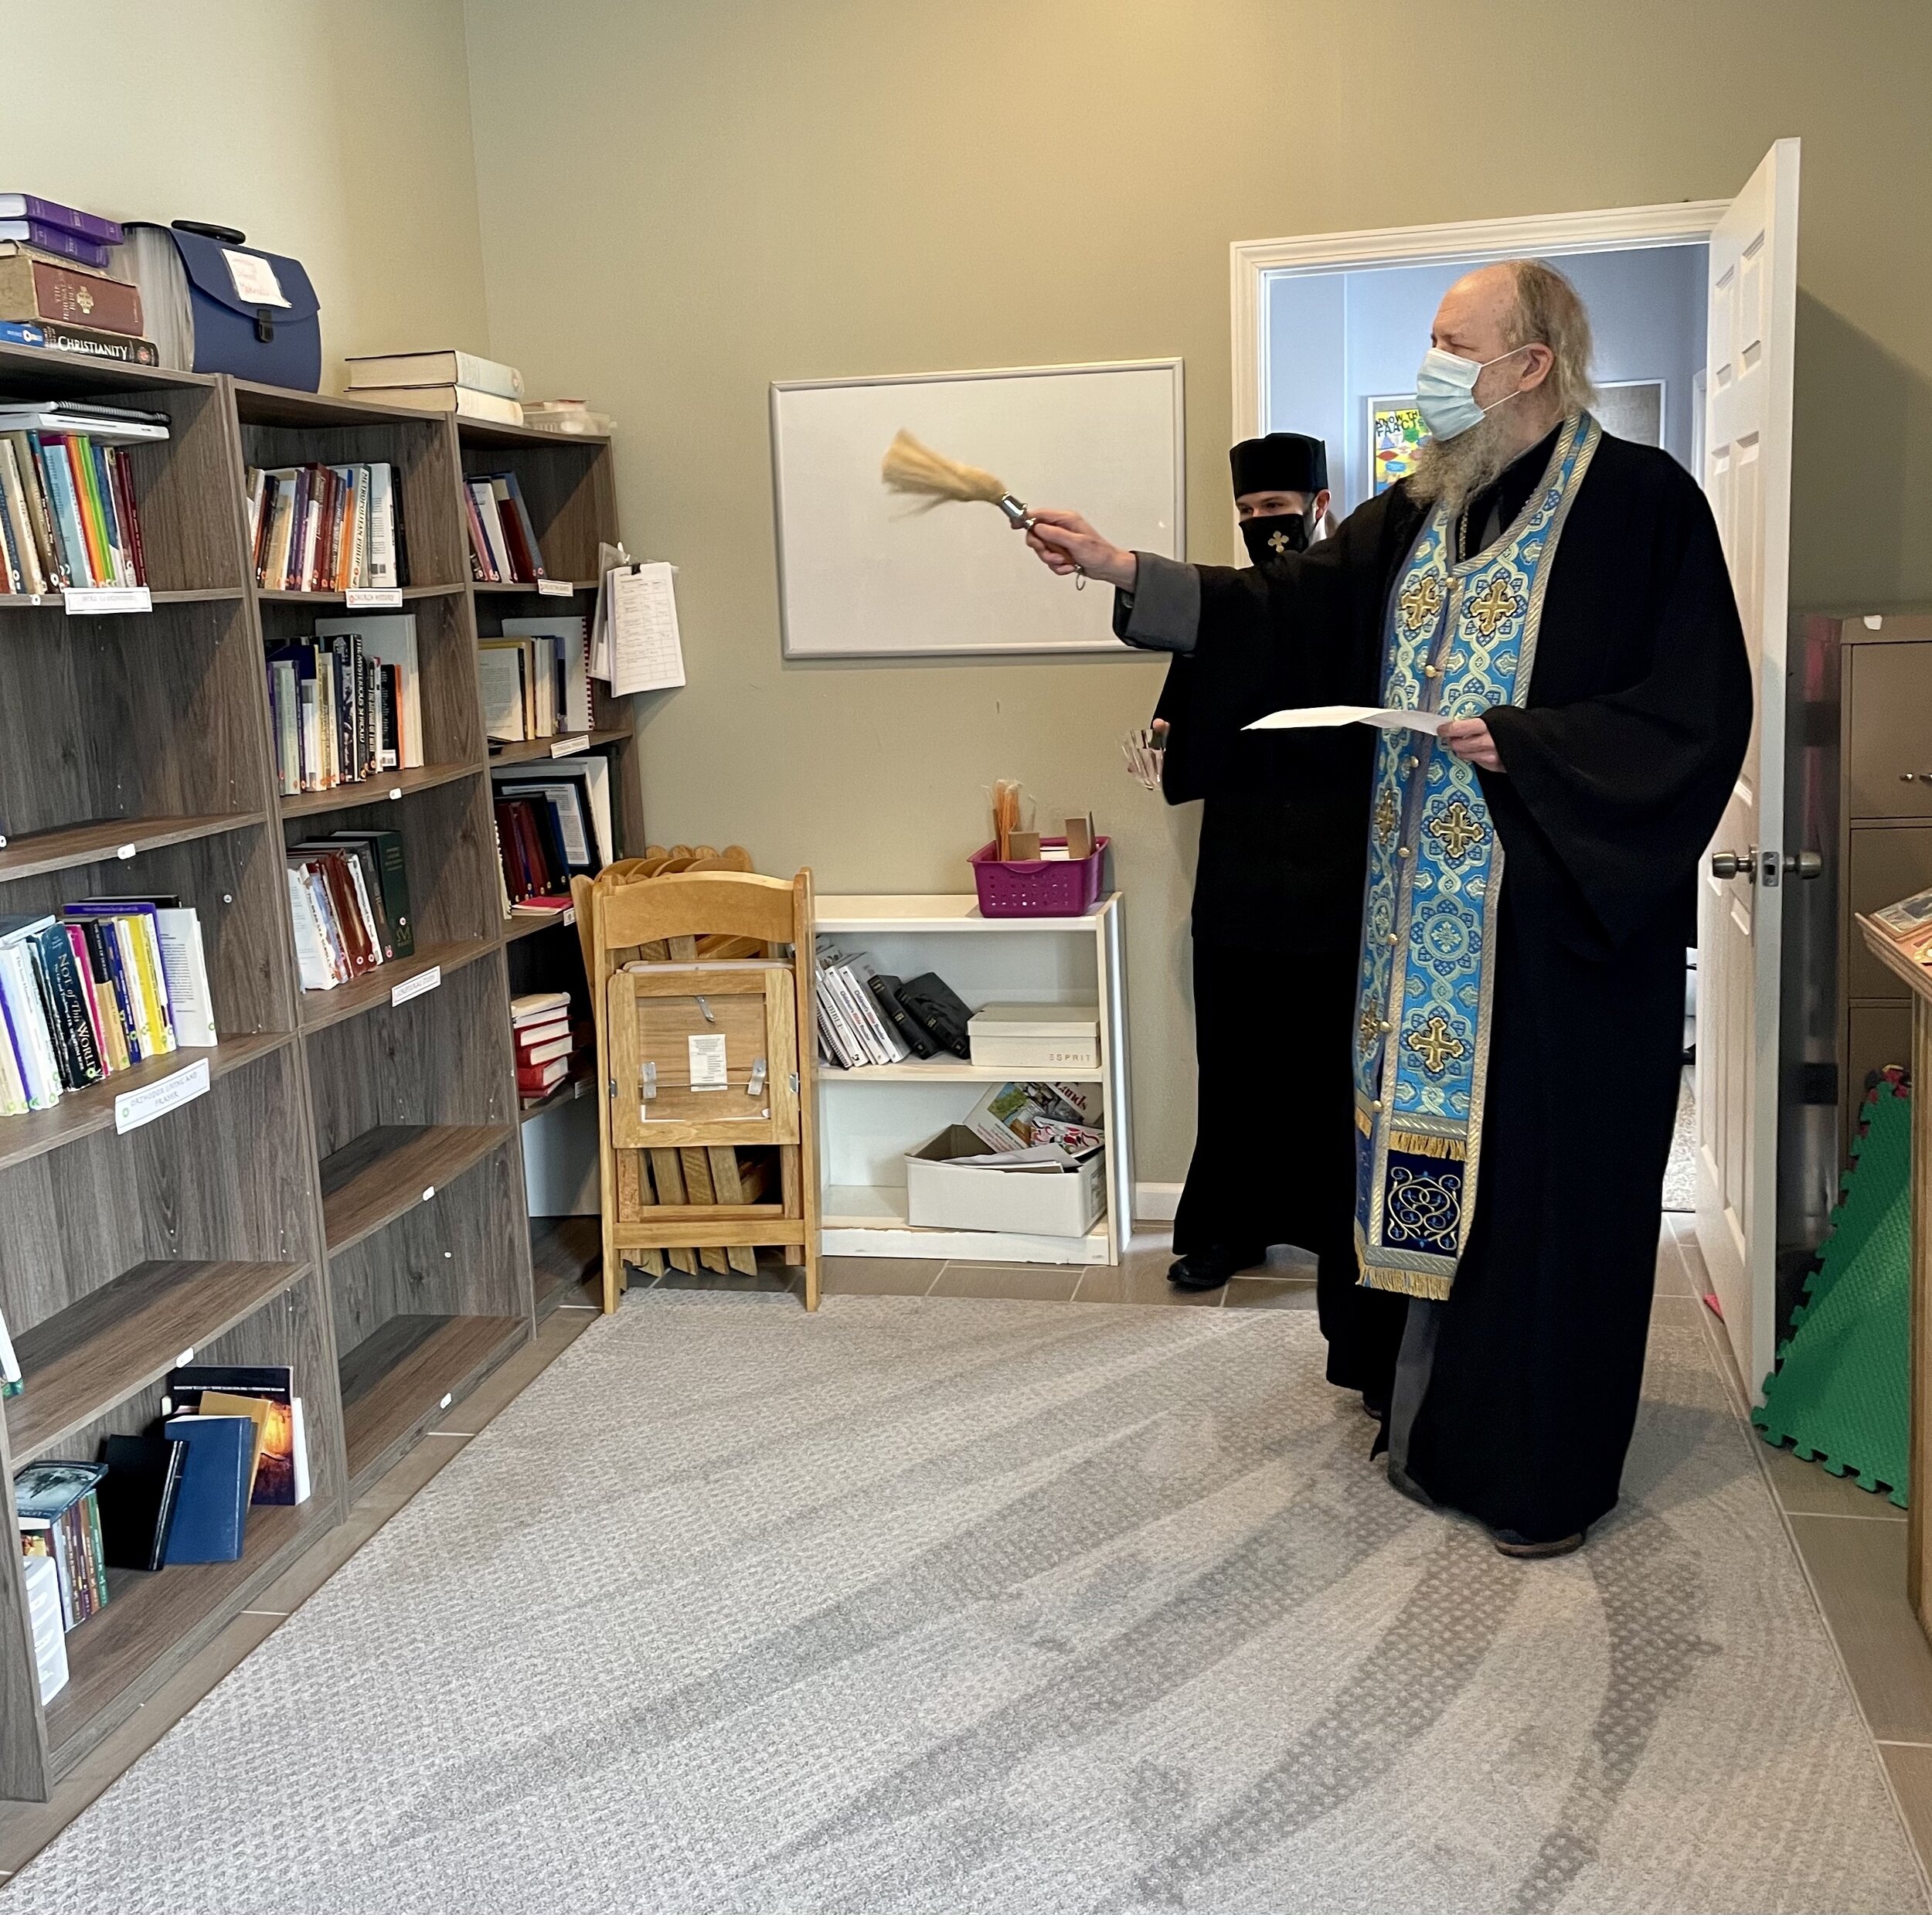 Archbishop Alexander Blessing The Education Center